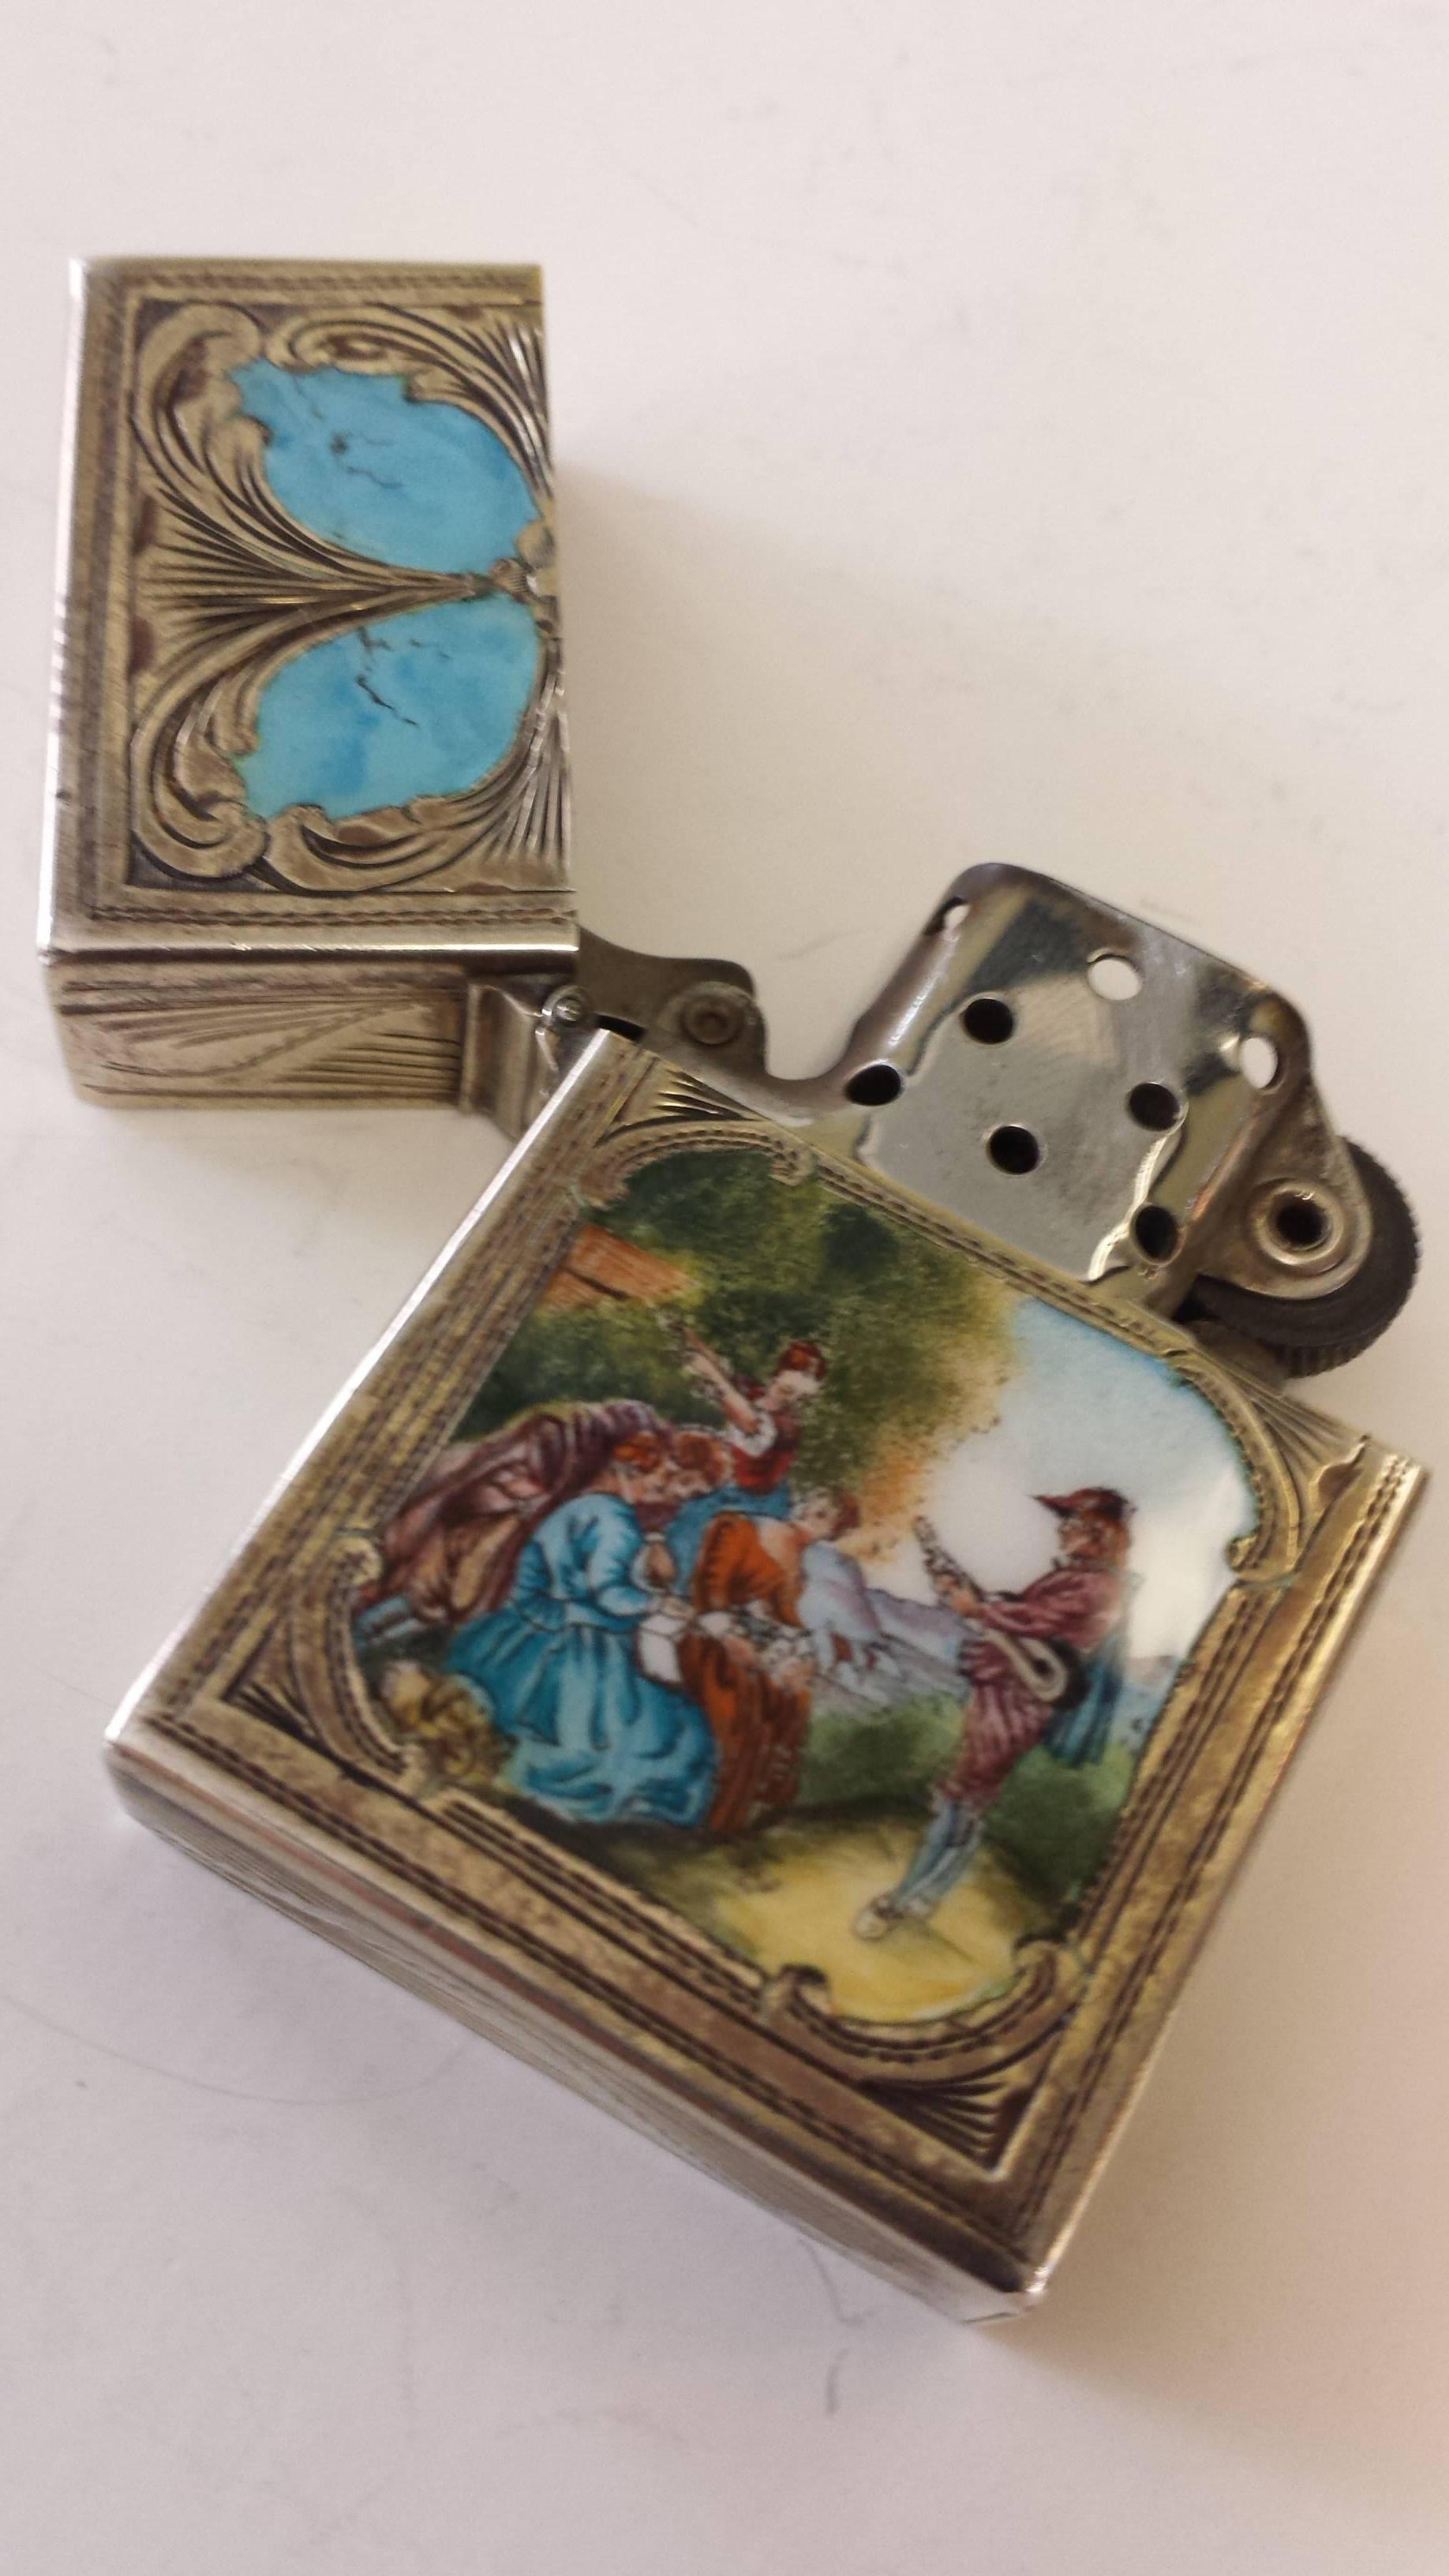 American Sterling Silver and Enamel, Engraved Lighter Case with a Minstral Scene